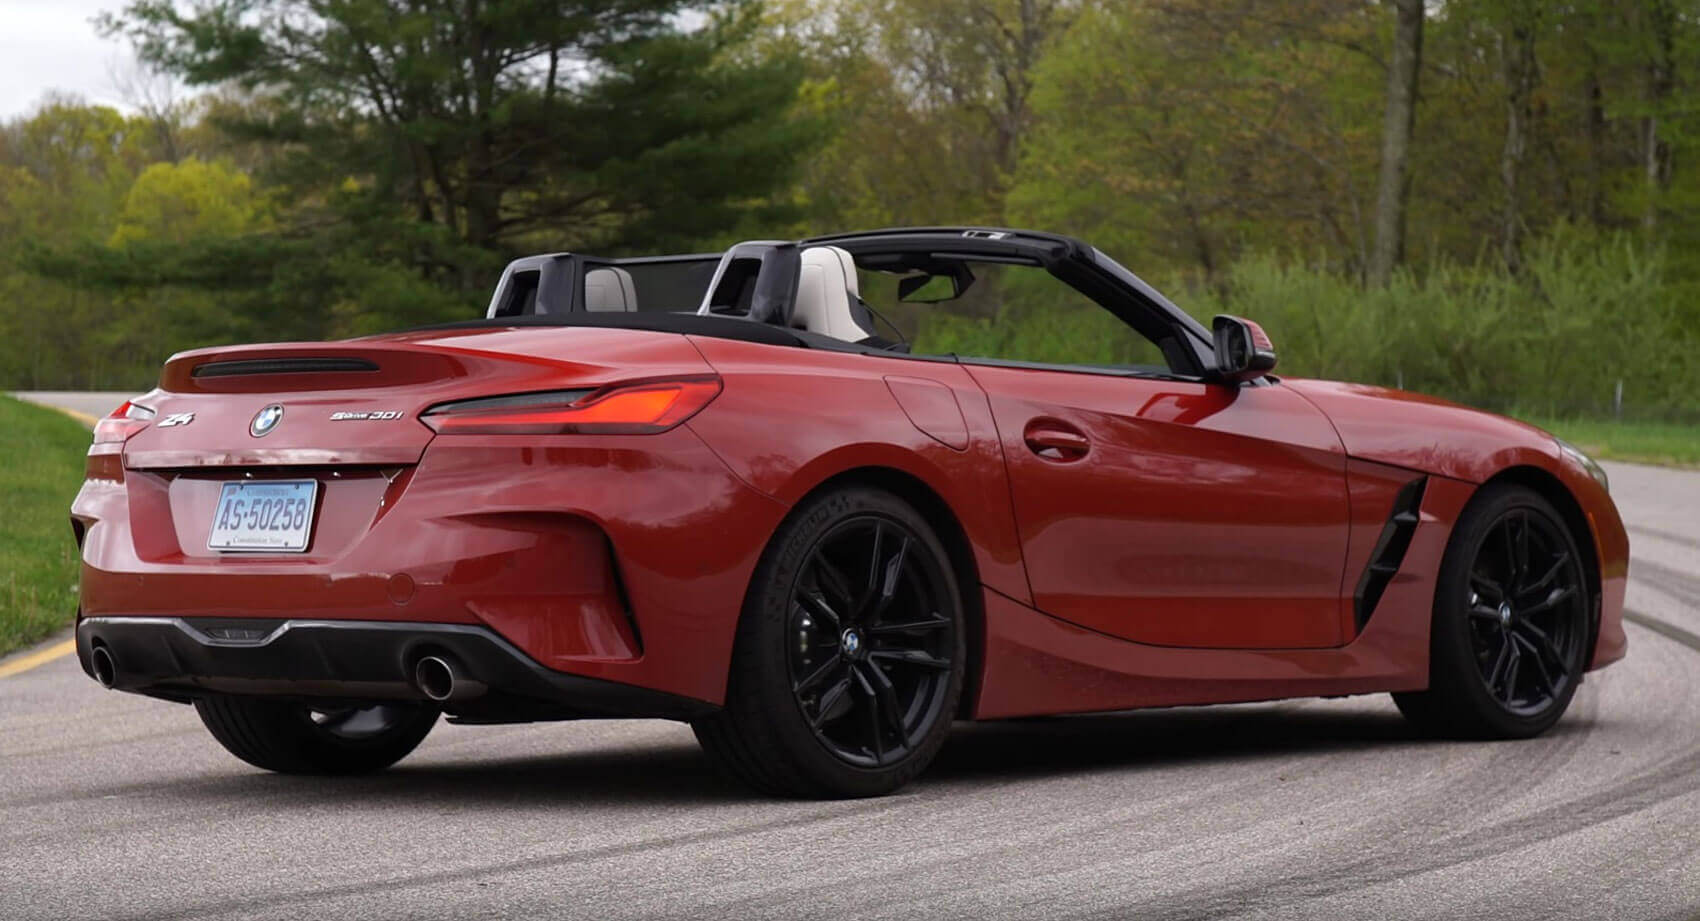 What Does Consumer Reports Think About The New BMW Z4? | Carscoops